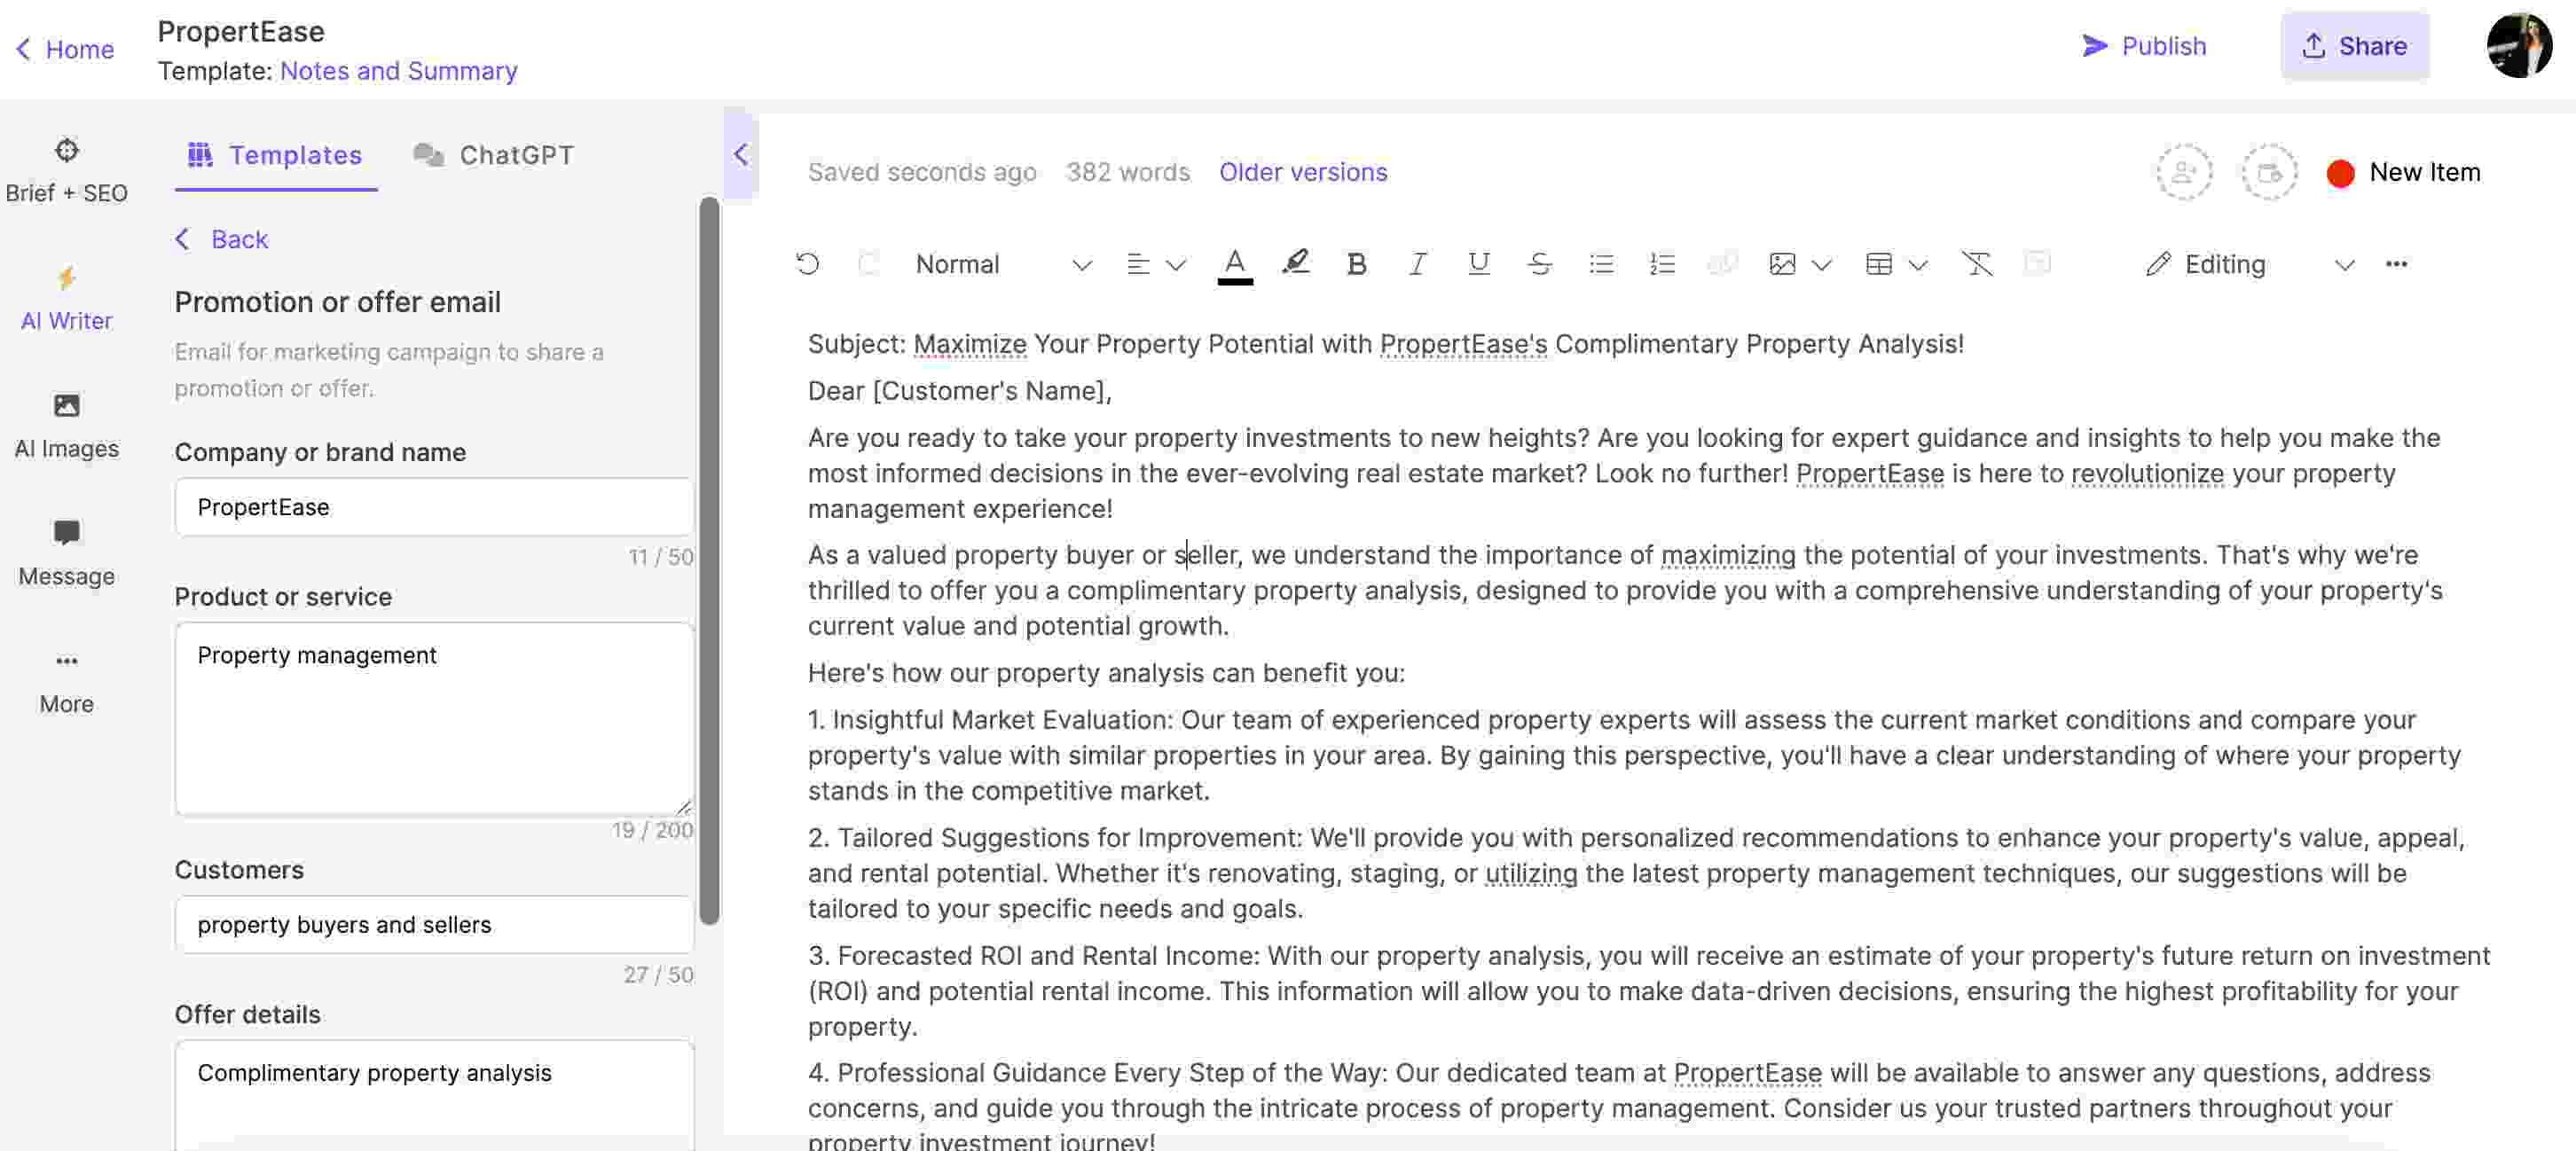 AI in real estate: Using Narrato's AI email writer to generate a promotional email